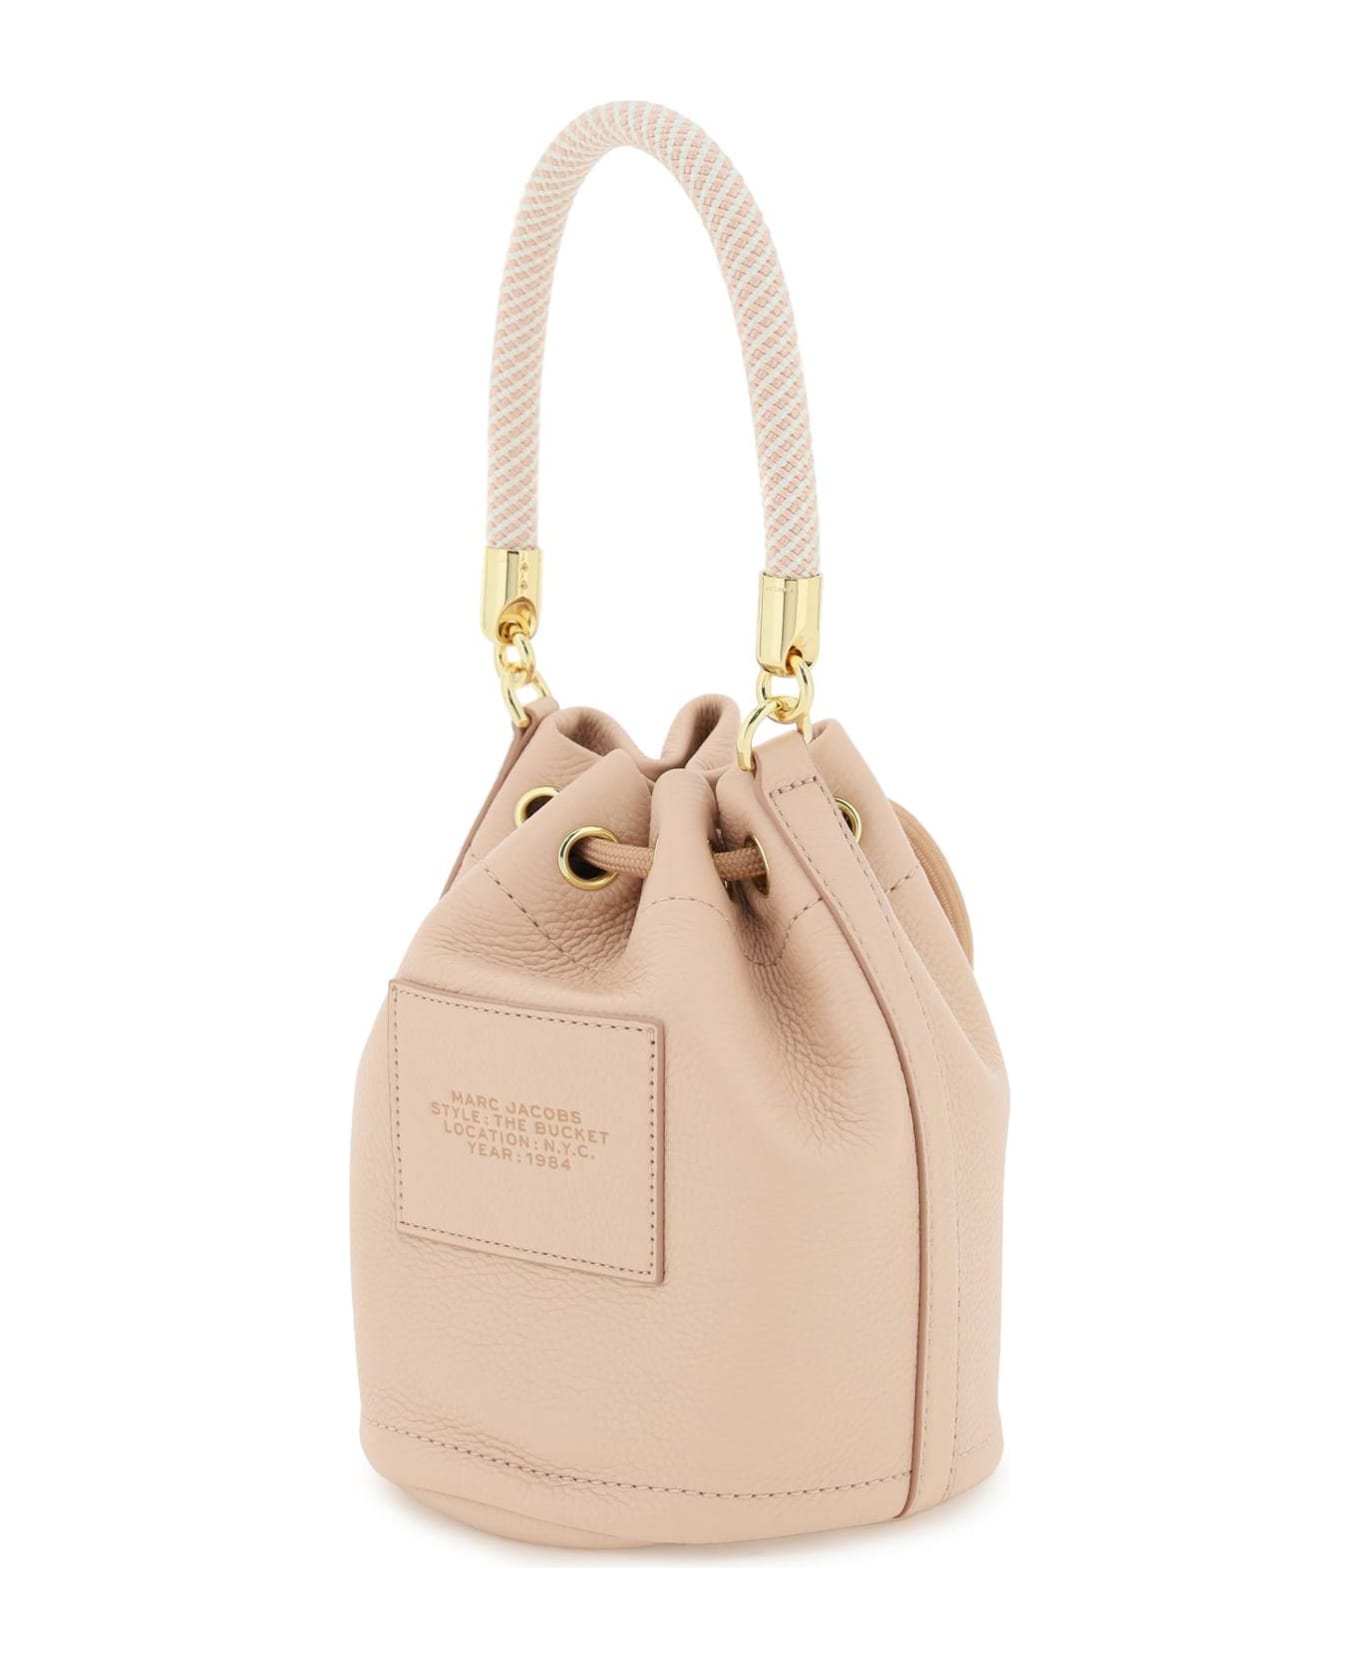 Marc Jacobs The Leather Bucket Bag - Pink トートバッグ